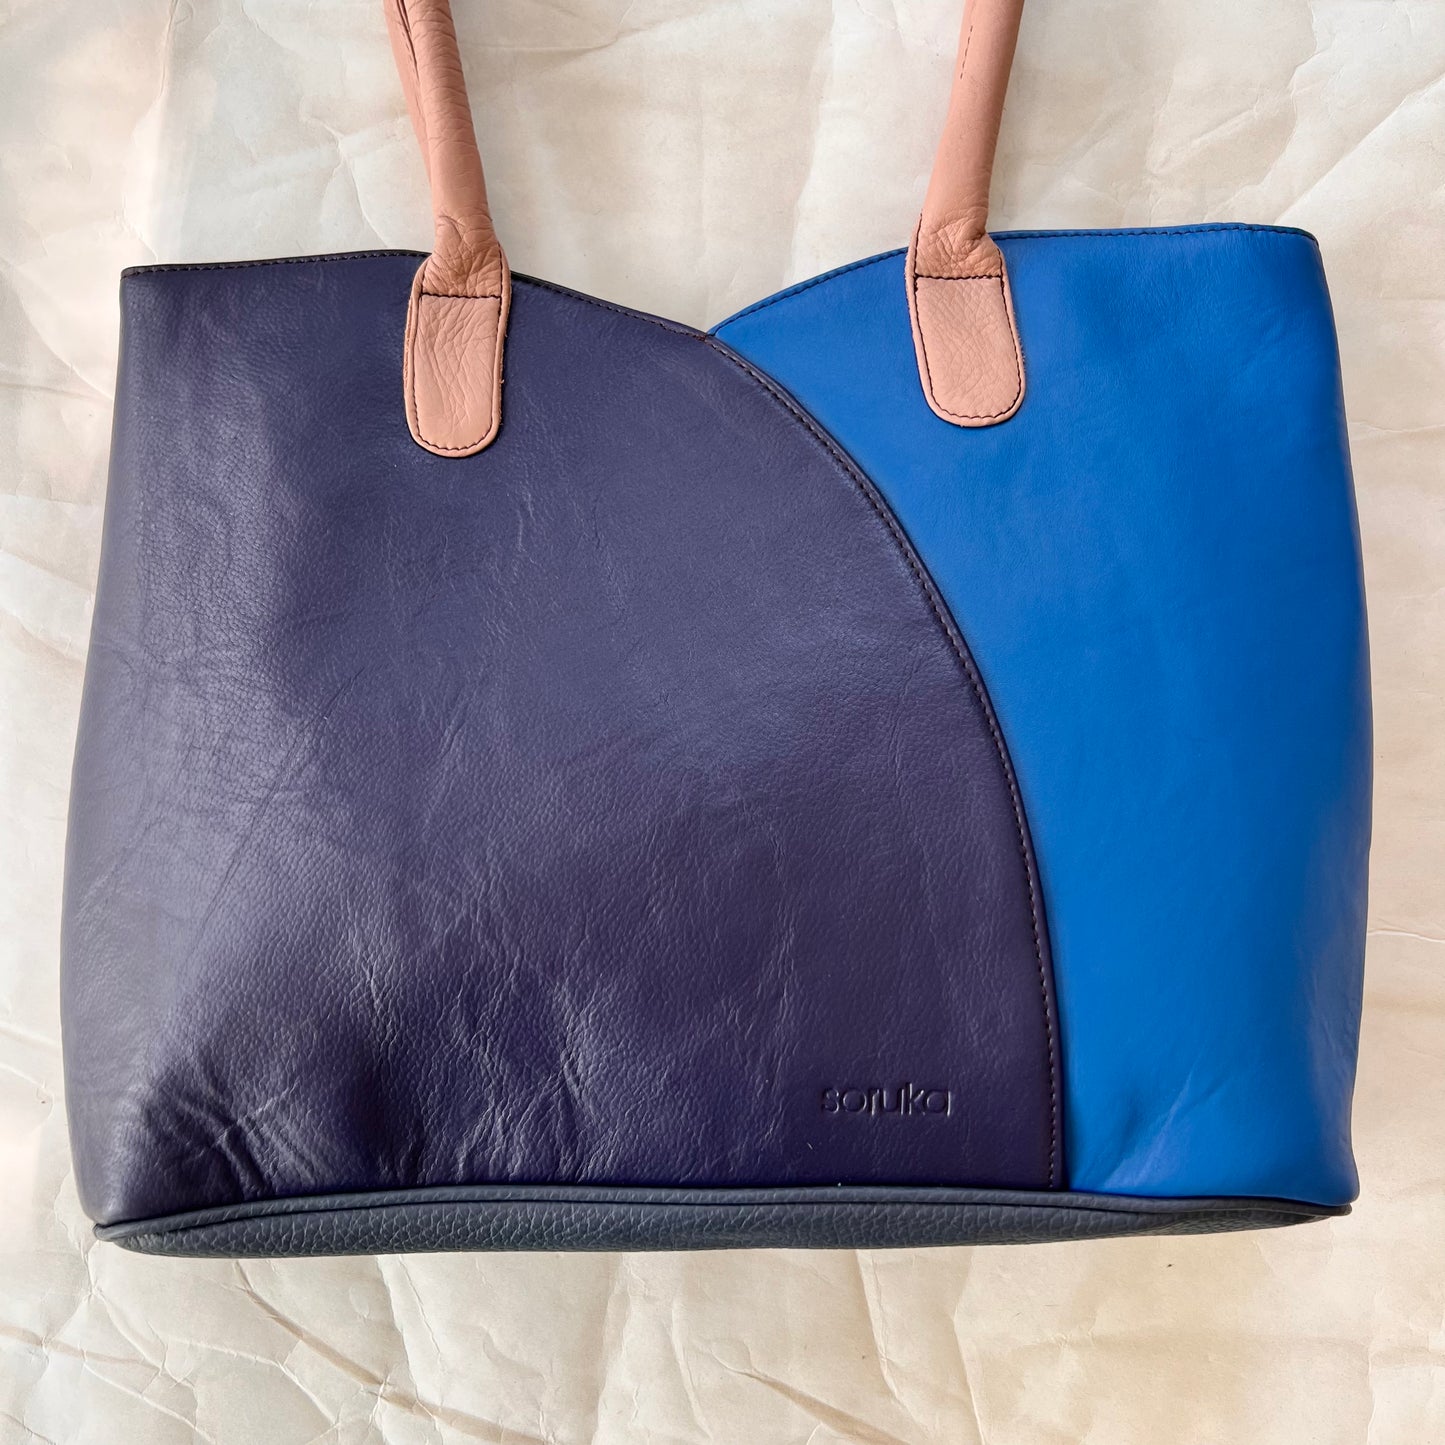 other side of valeria tote that is half bright blue and half navy blue.